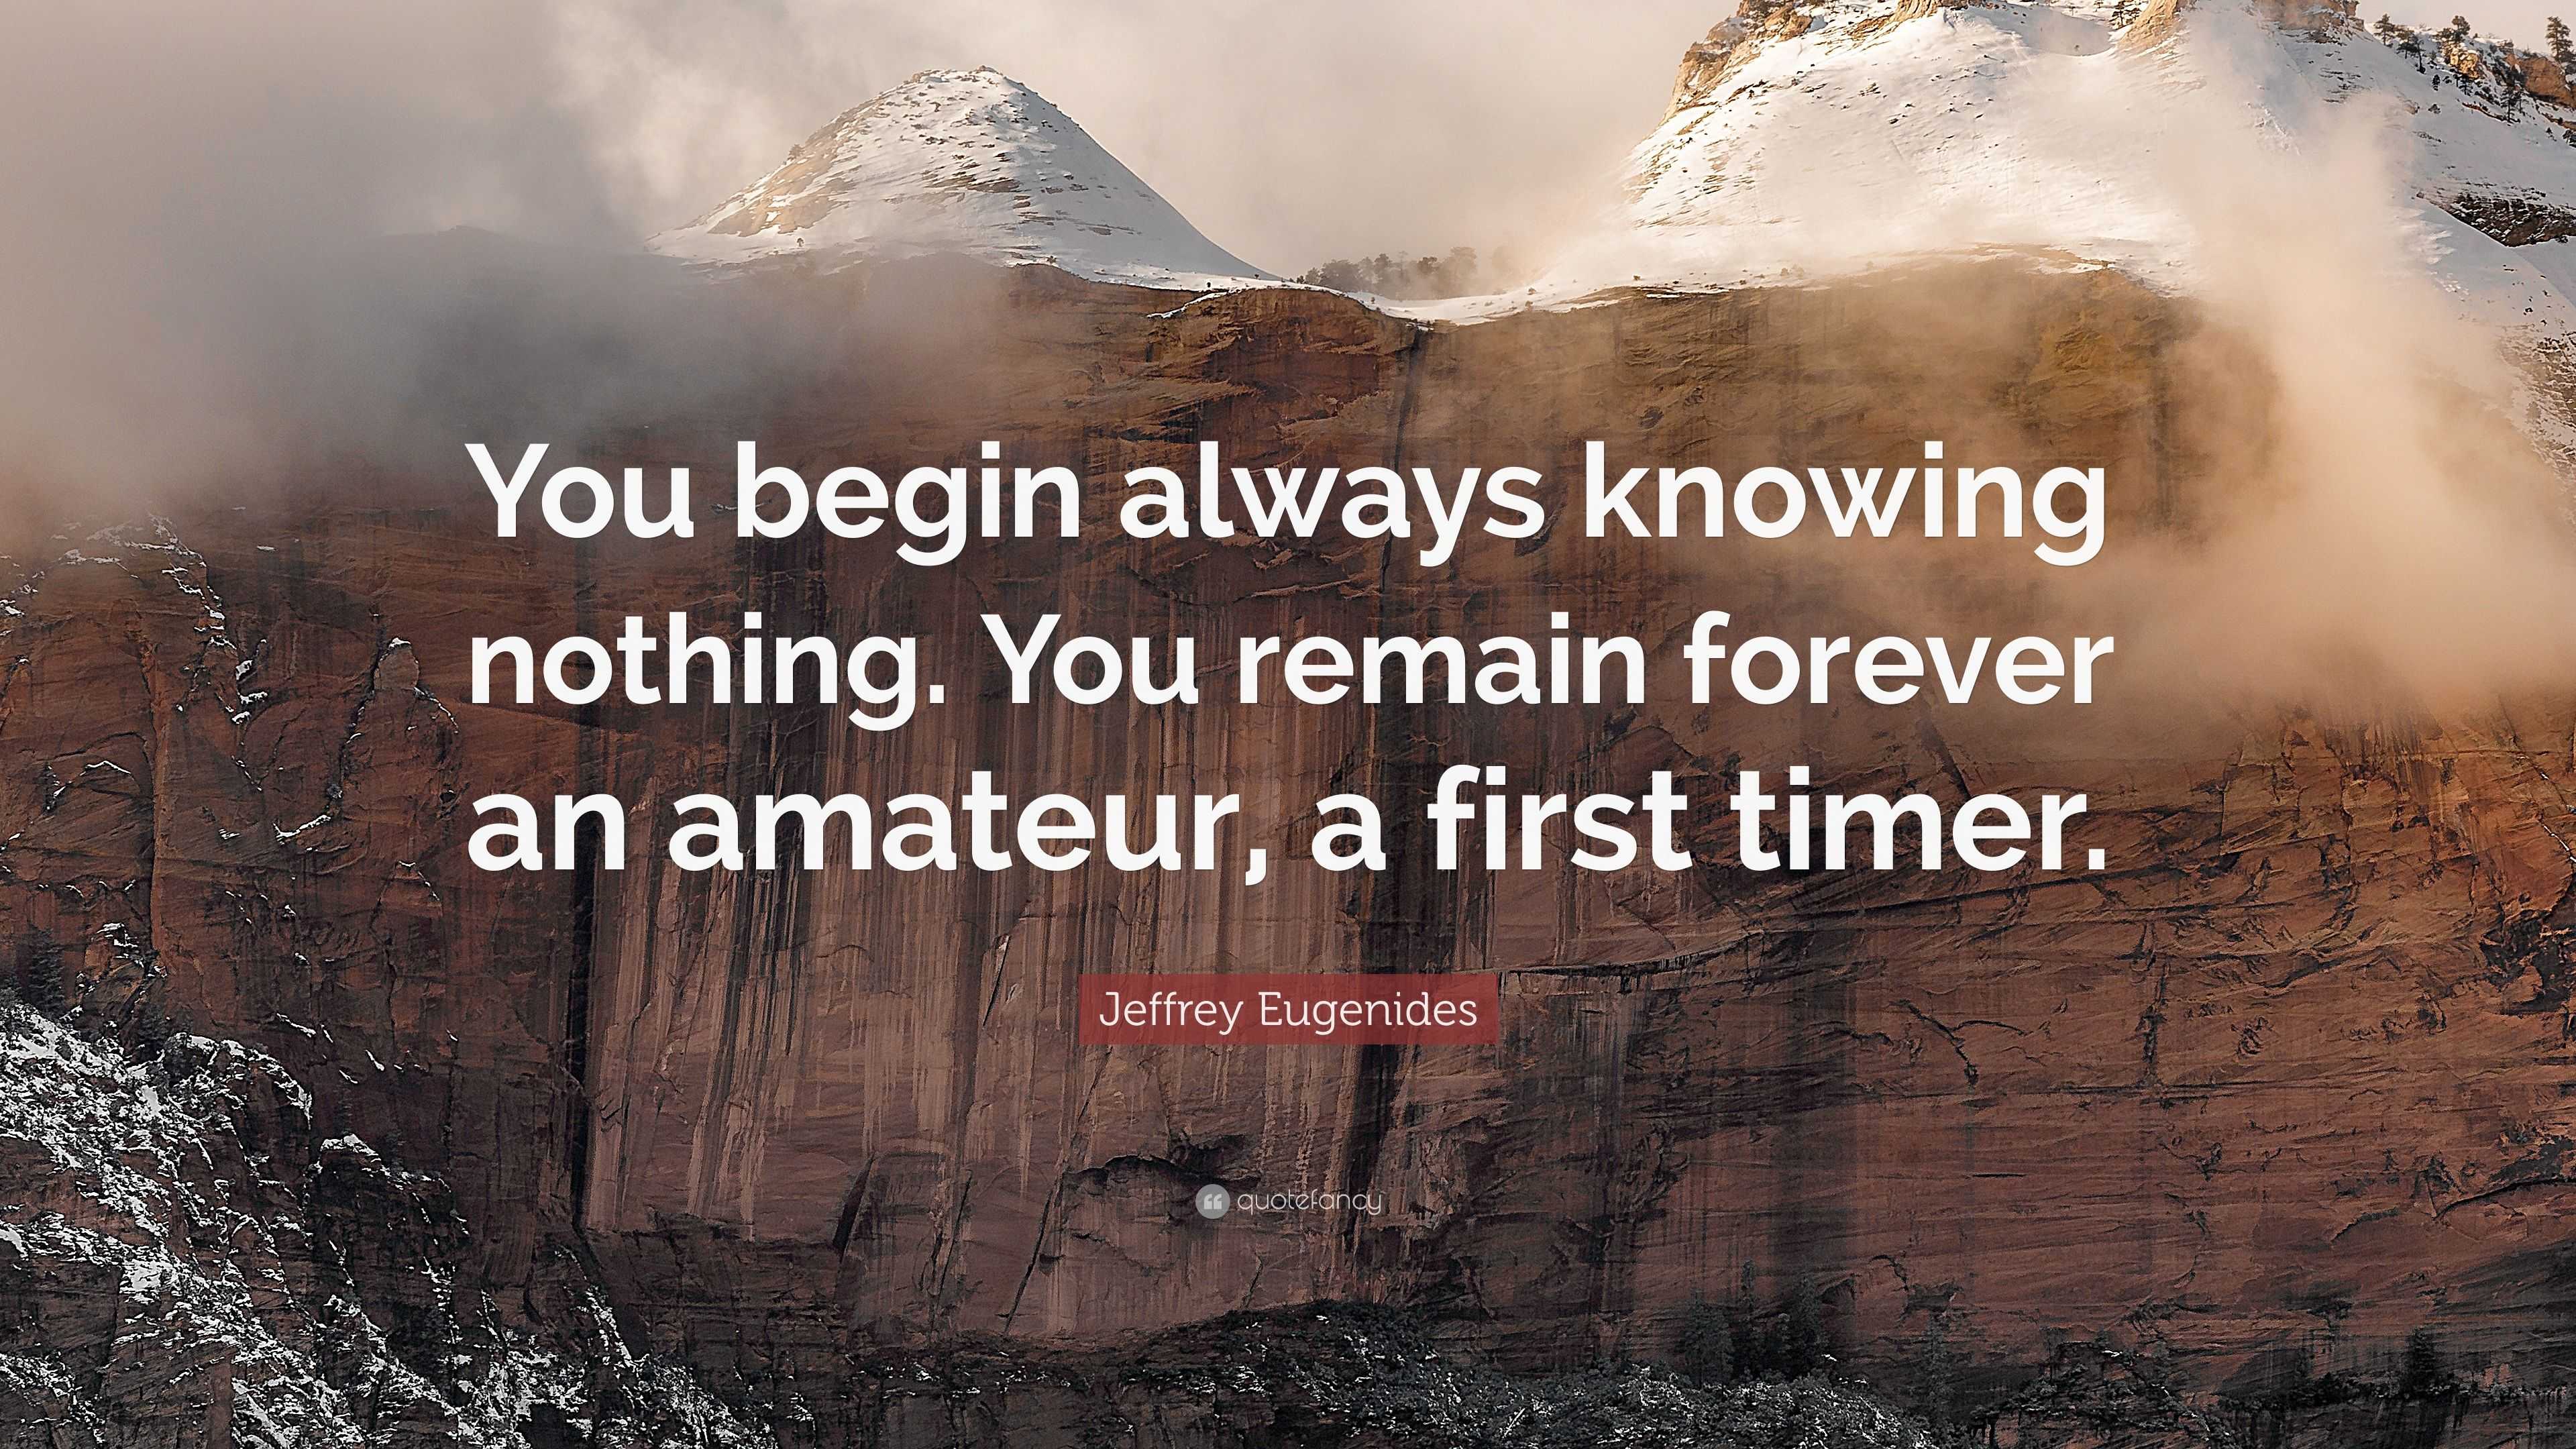 Jeffrey Eugenides Quote: “You begin always knowing nothing. You remain ...